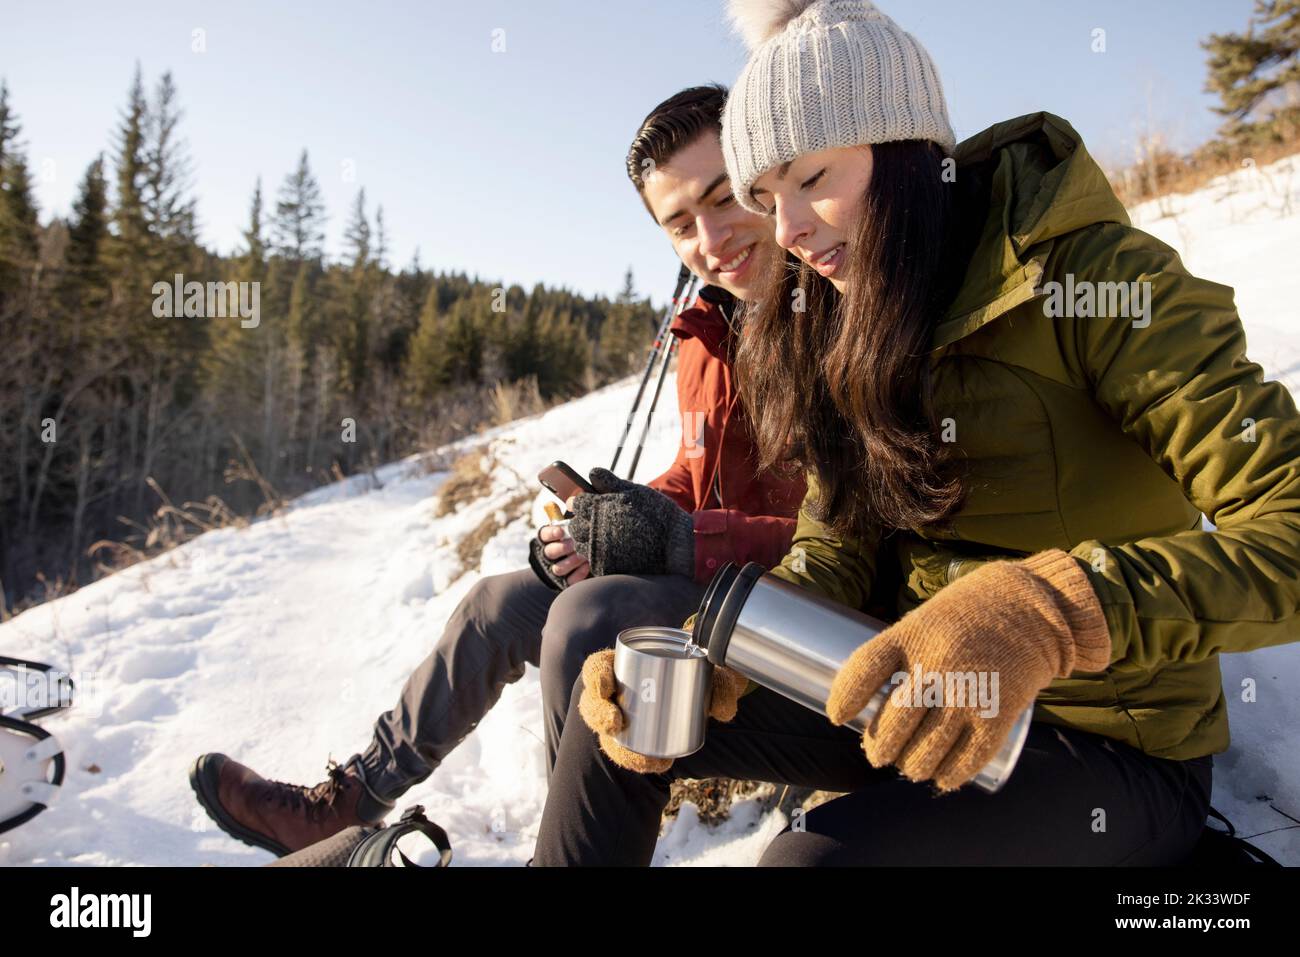 Couple stopping for drink on snowy hike Stock Photo